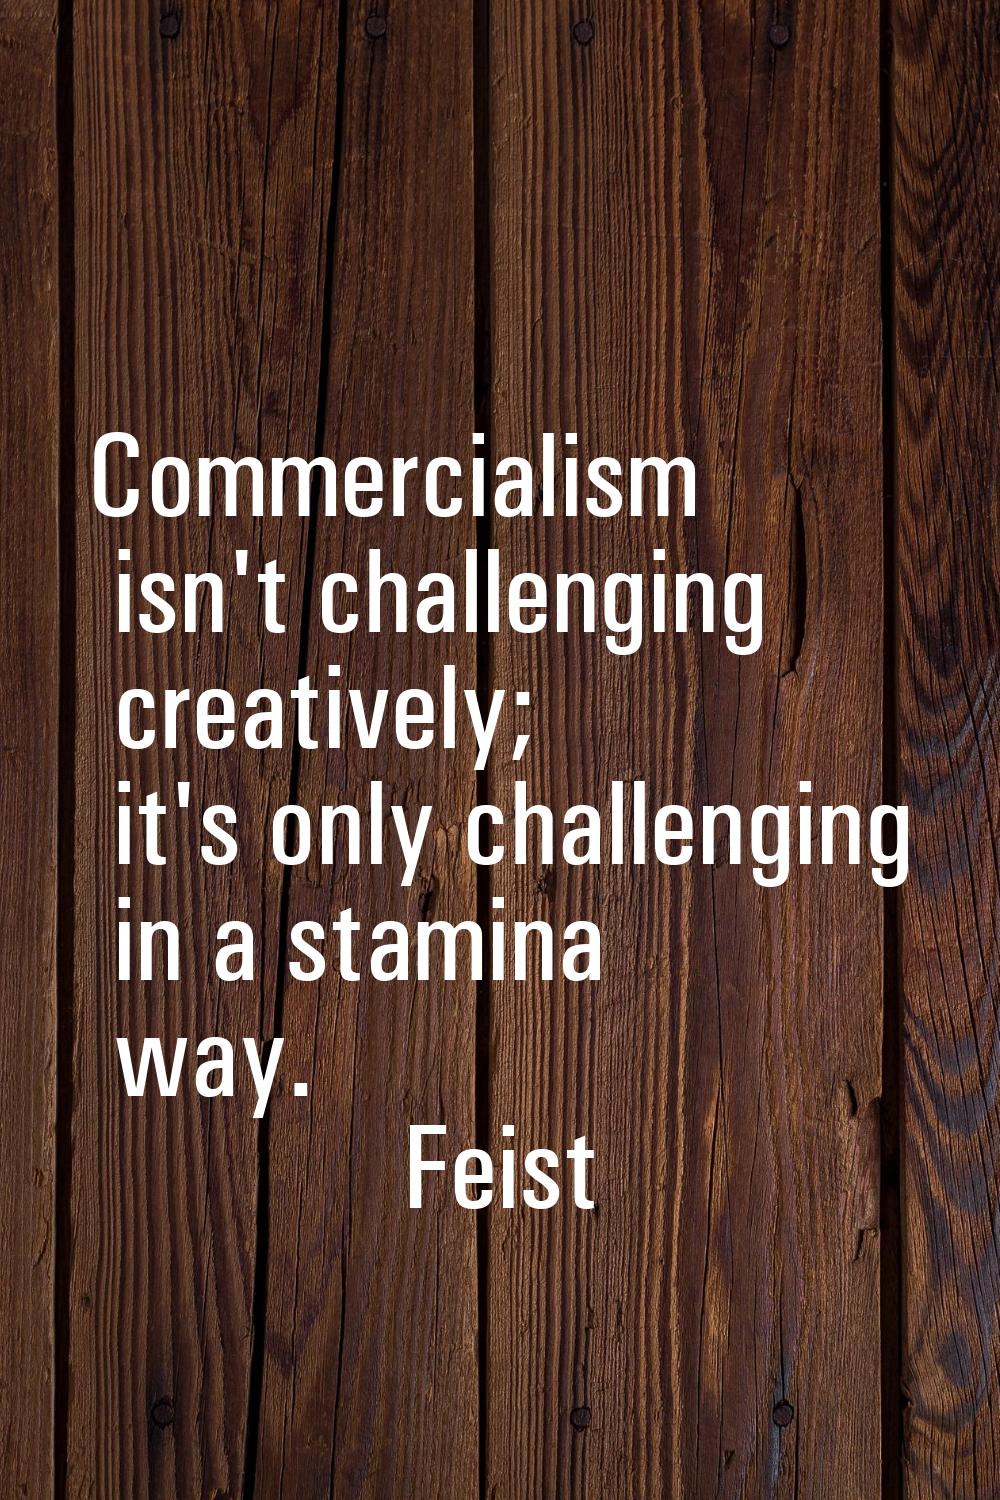 Commercialism isn't challenging creatively; it's only challenging in a stamina way.